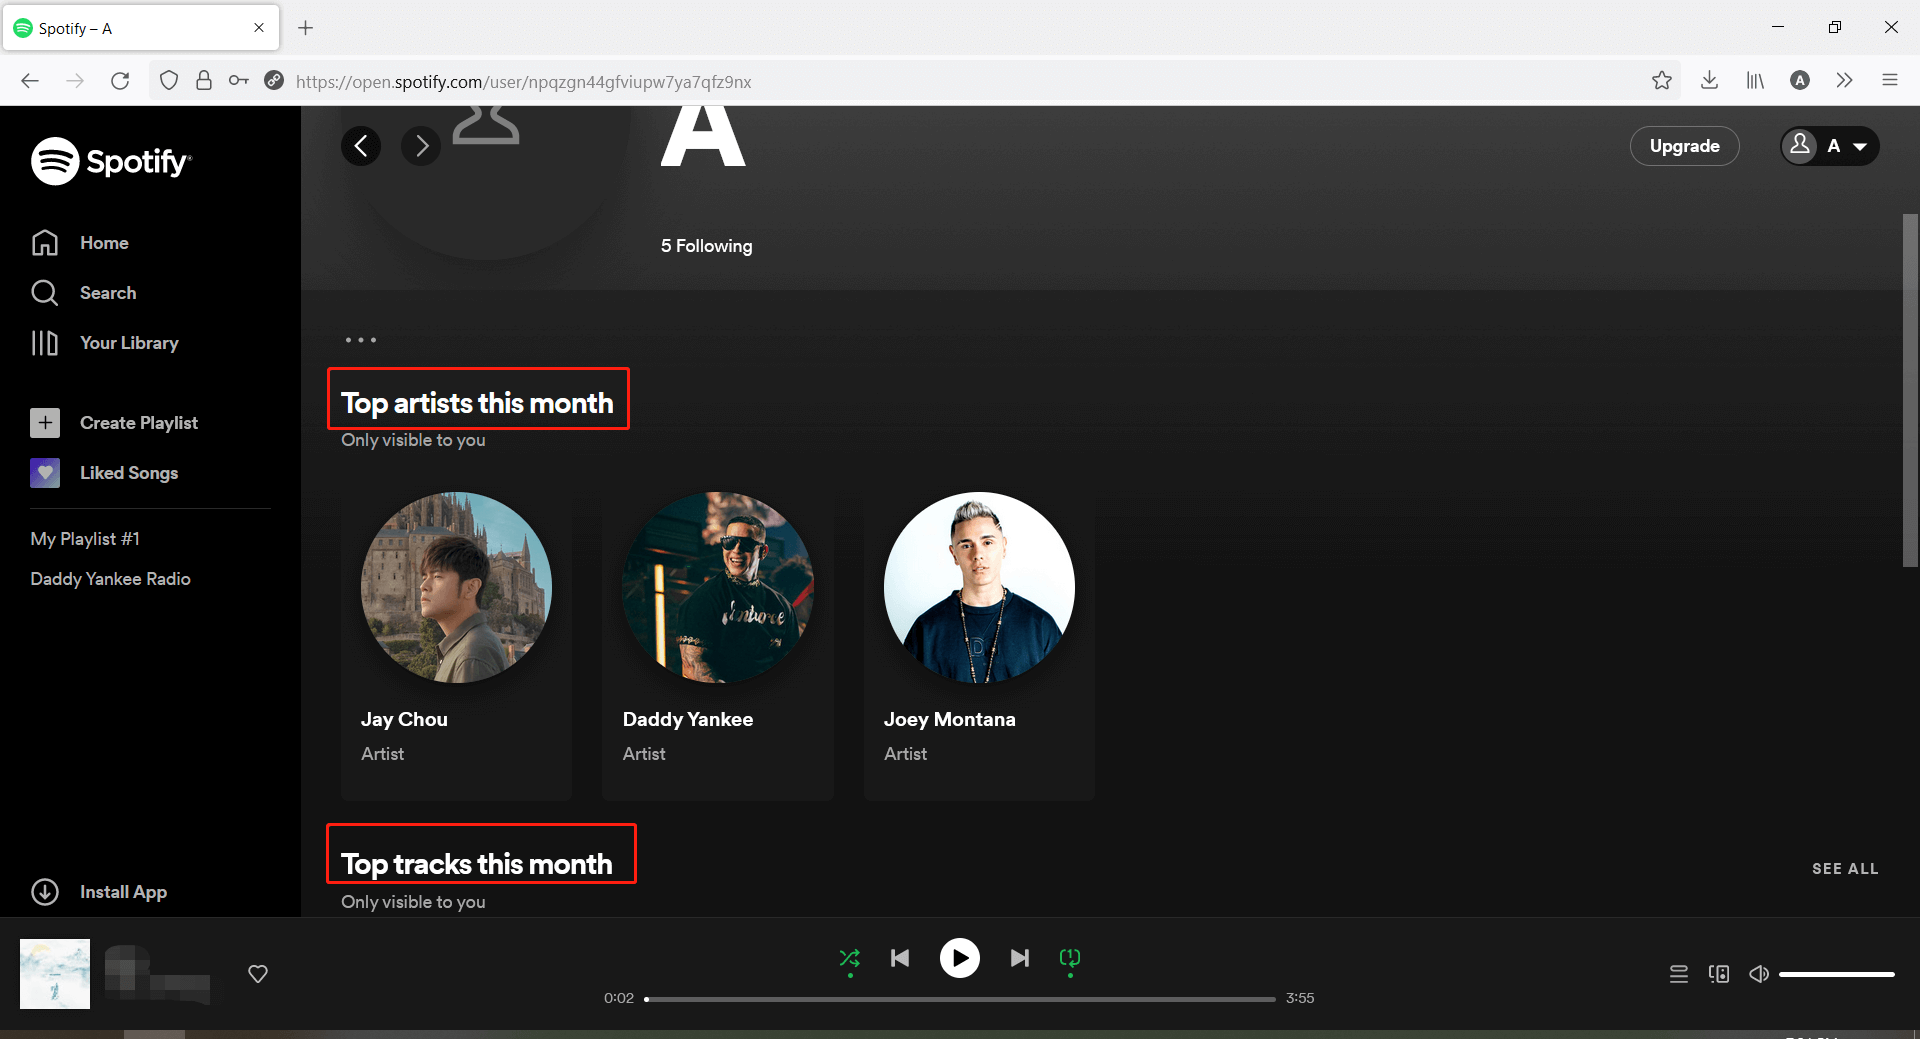 see your top artists and tracks this month